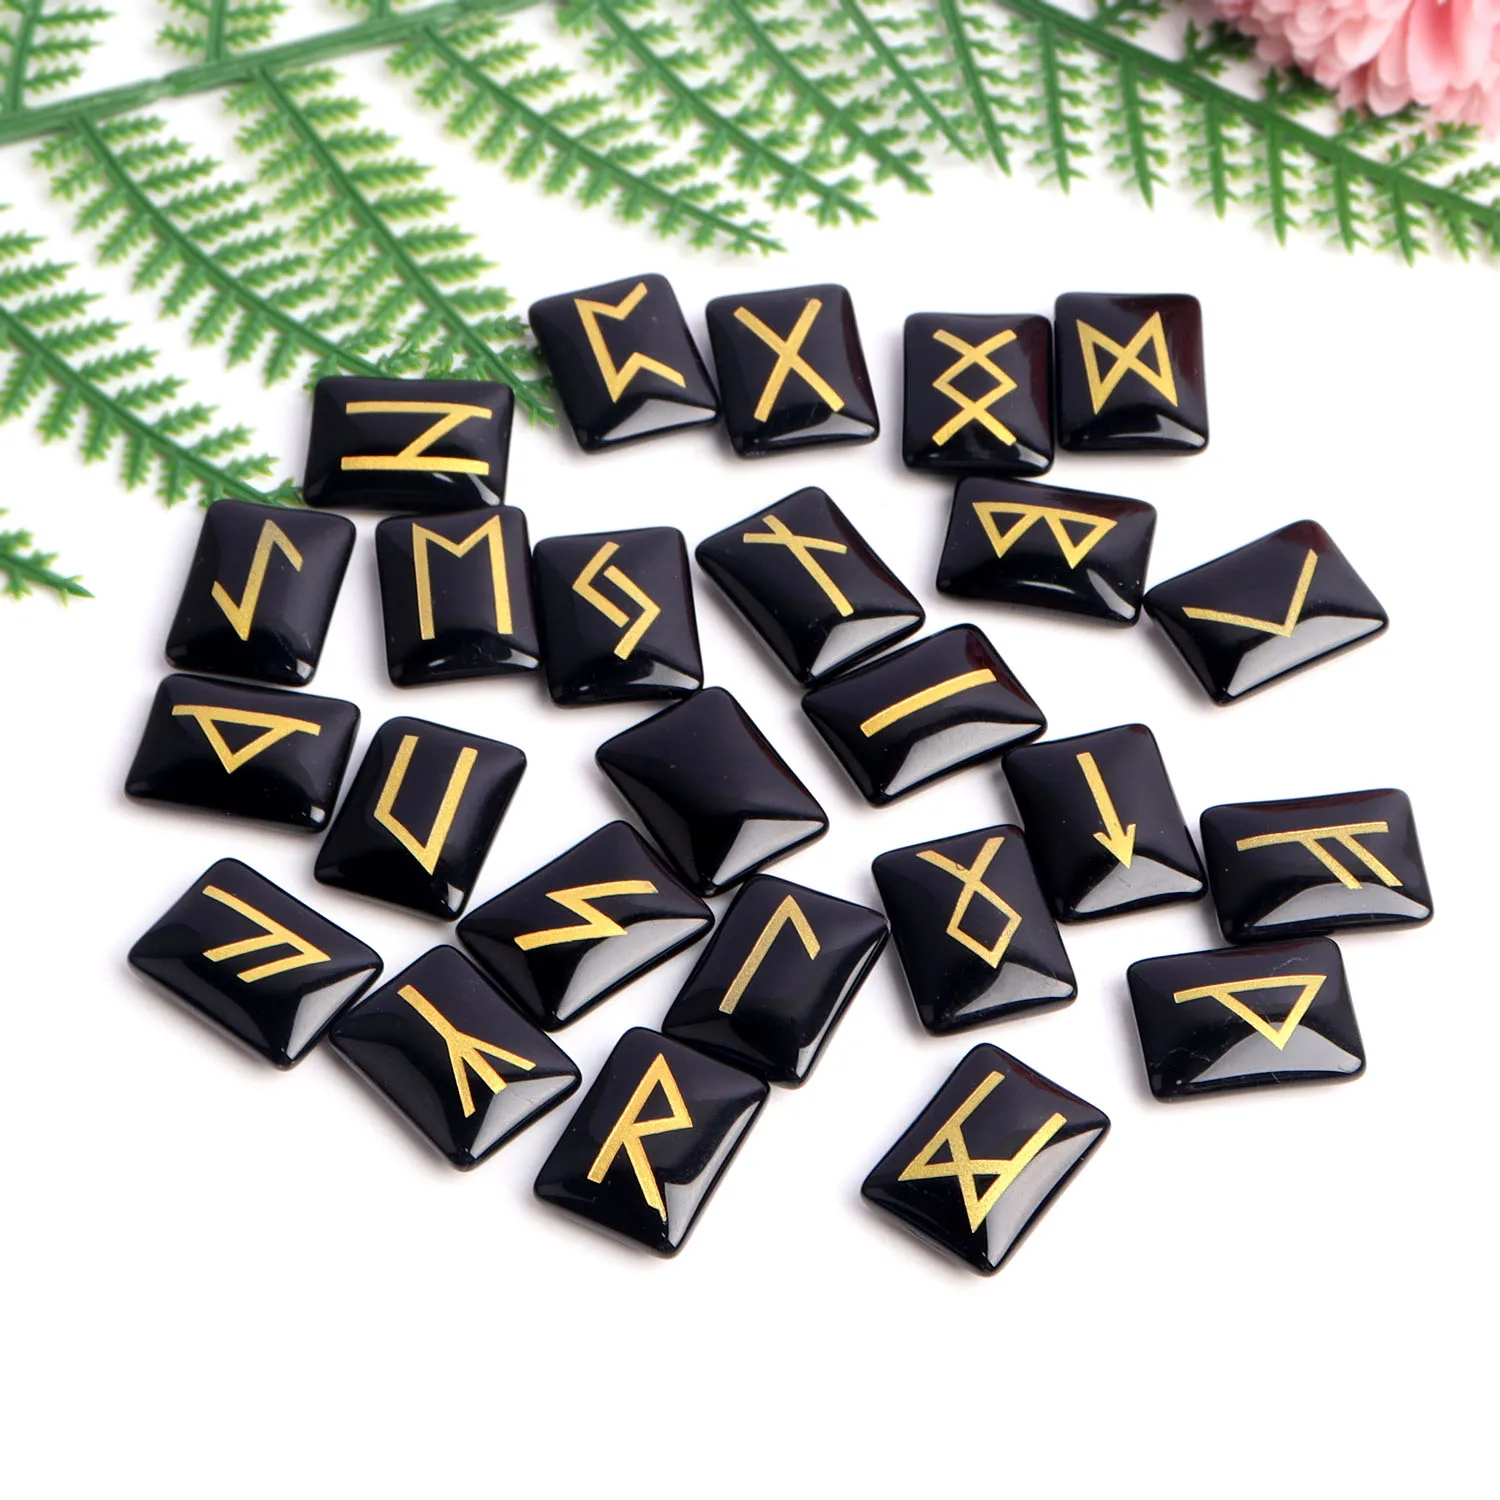 

25pcs Glass Rune Symbols Stone Carved Divination Mineral Meditation Healing Fortune-telling Reiki Collection Home Decor Gift